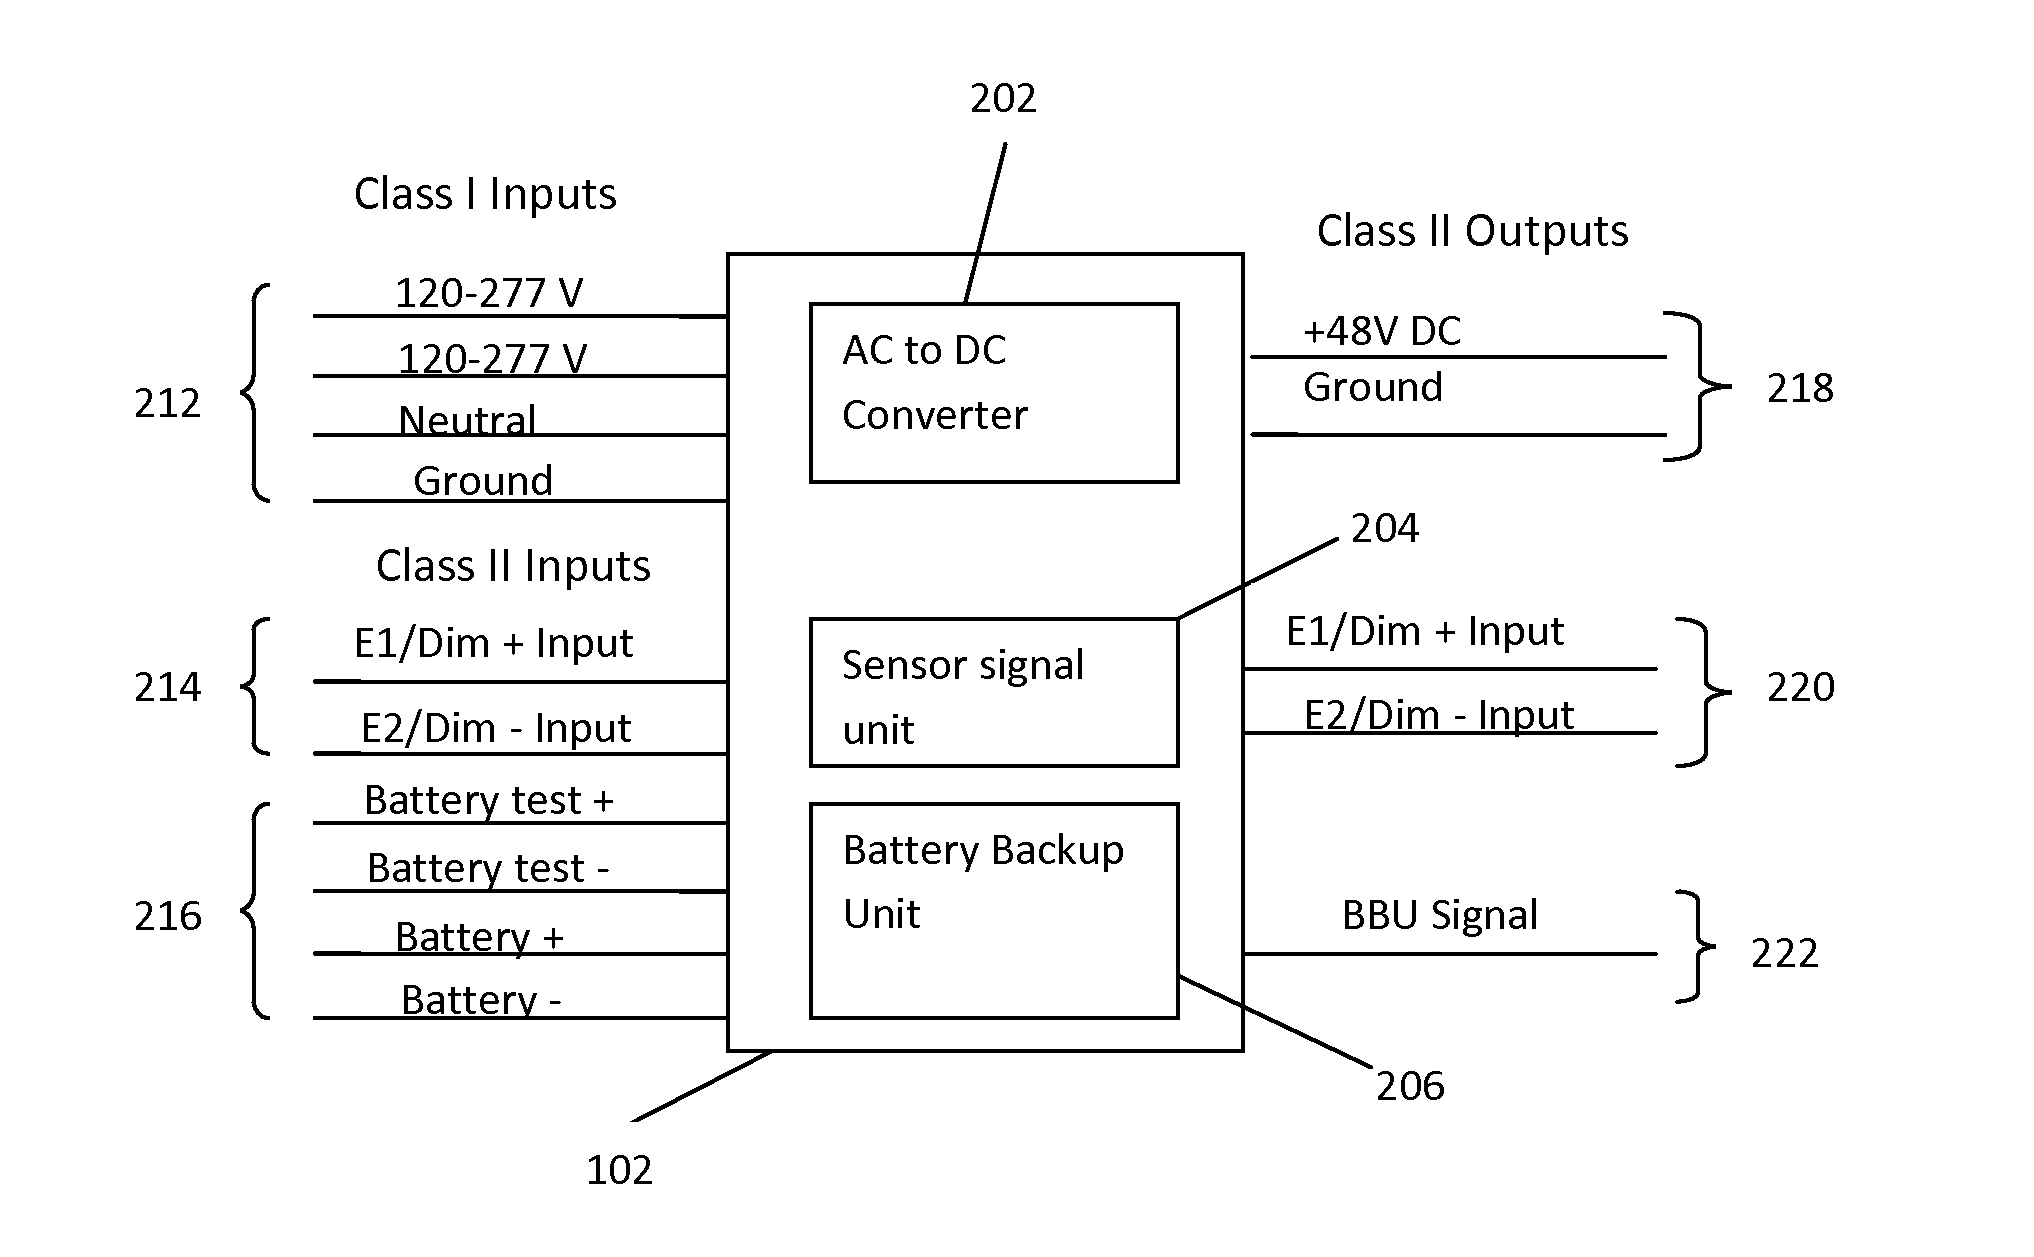 Hybrid Power Architecture for Controlling a Lighting System